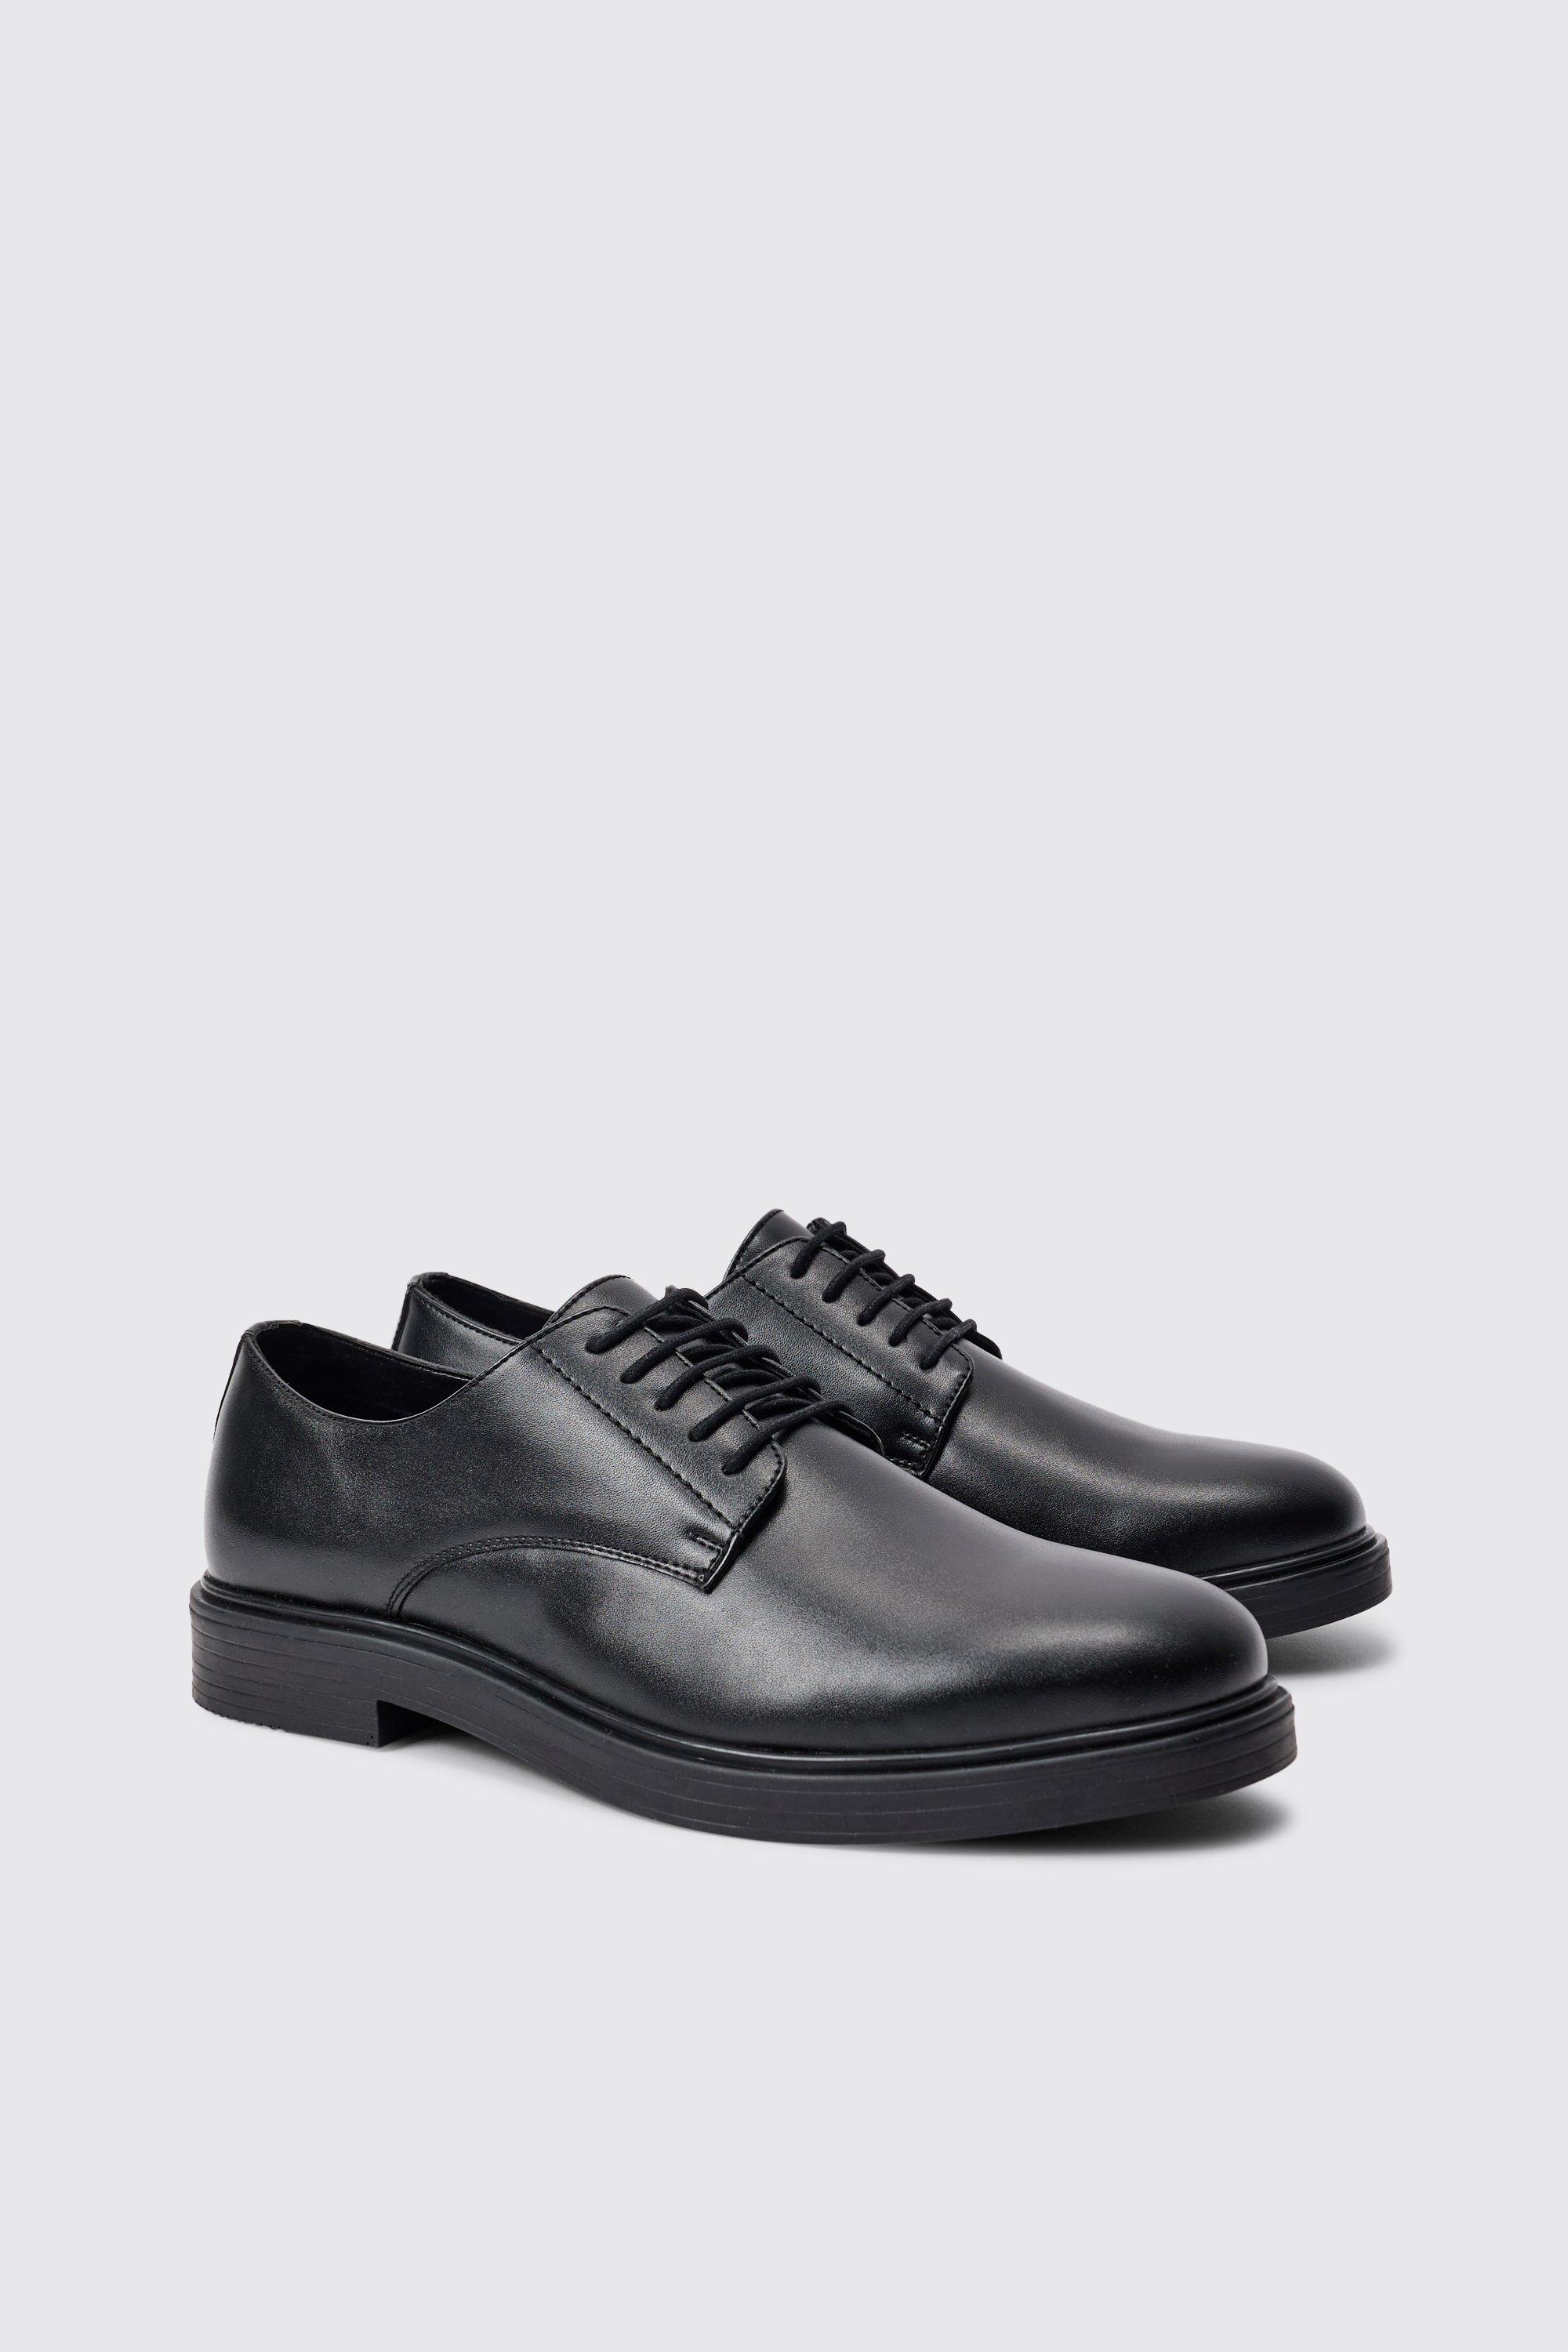 Image of Pu Lace Up Loafer In Black, Nero